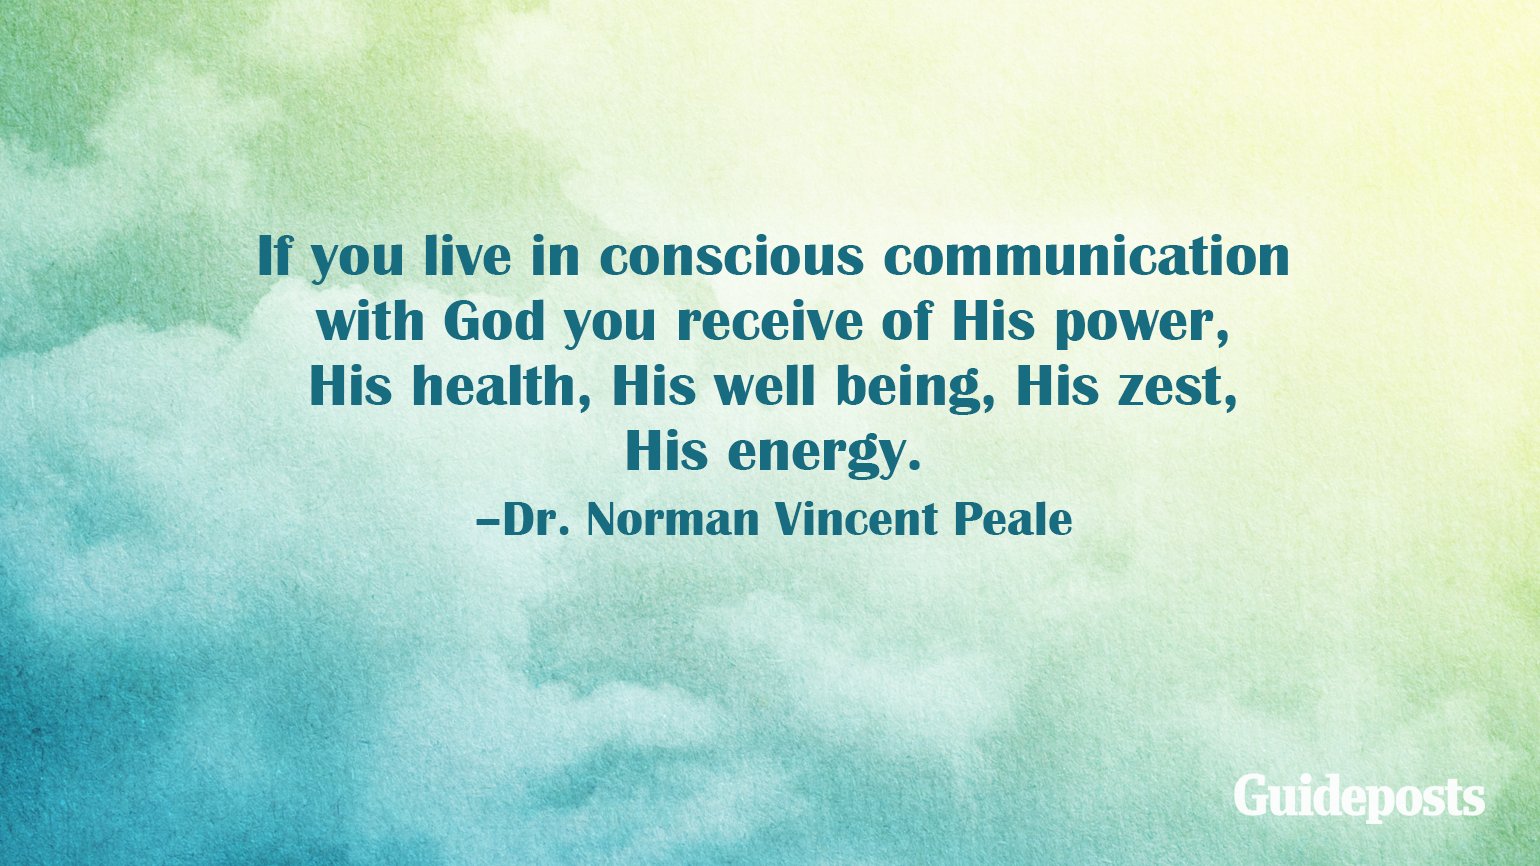 If you live in conscious communication with God you receive of His power, His health, His well being, His zest, His energy. –Dr. Norman Vincent Peale